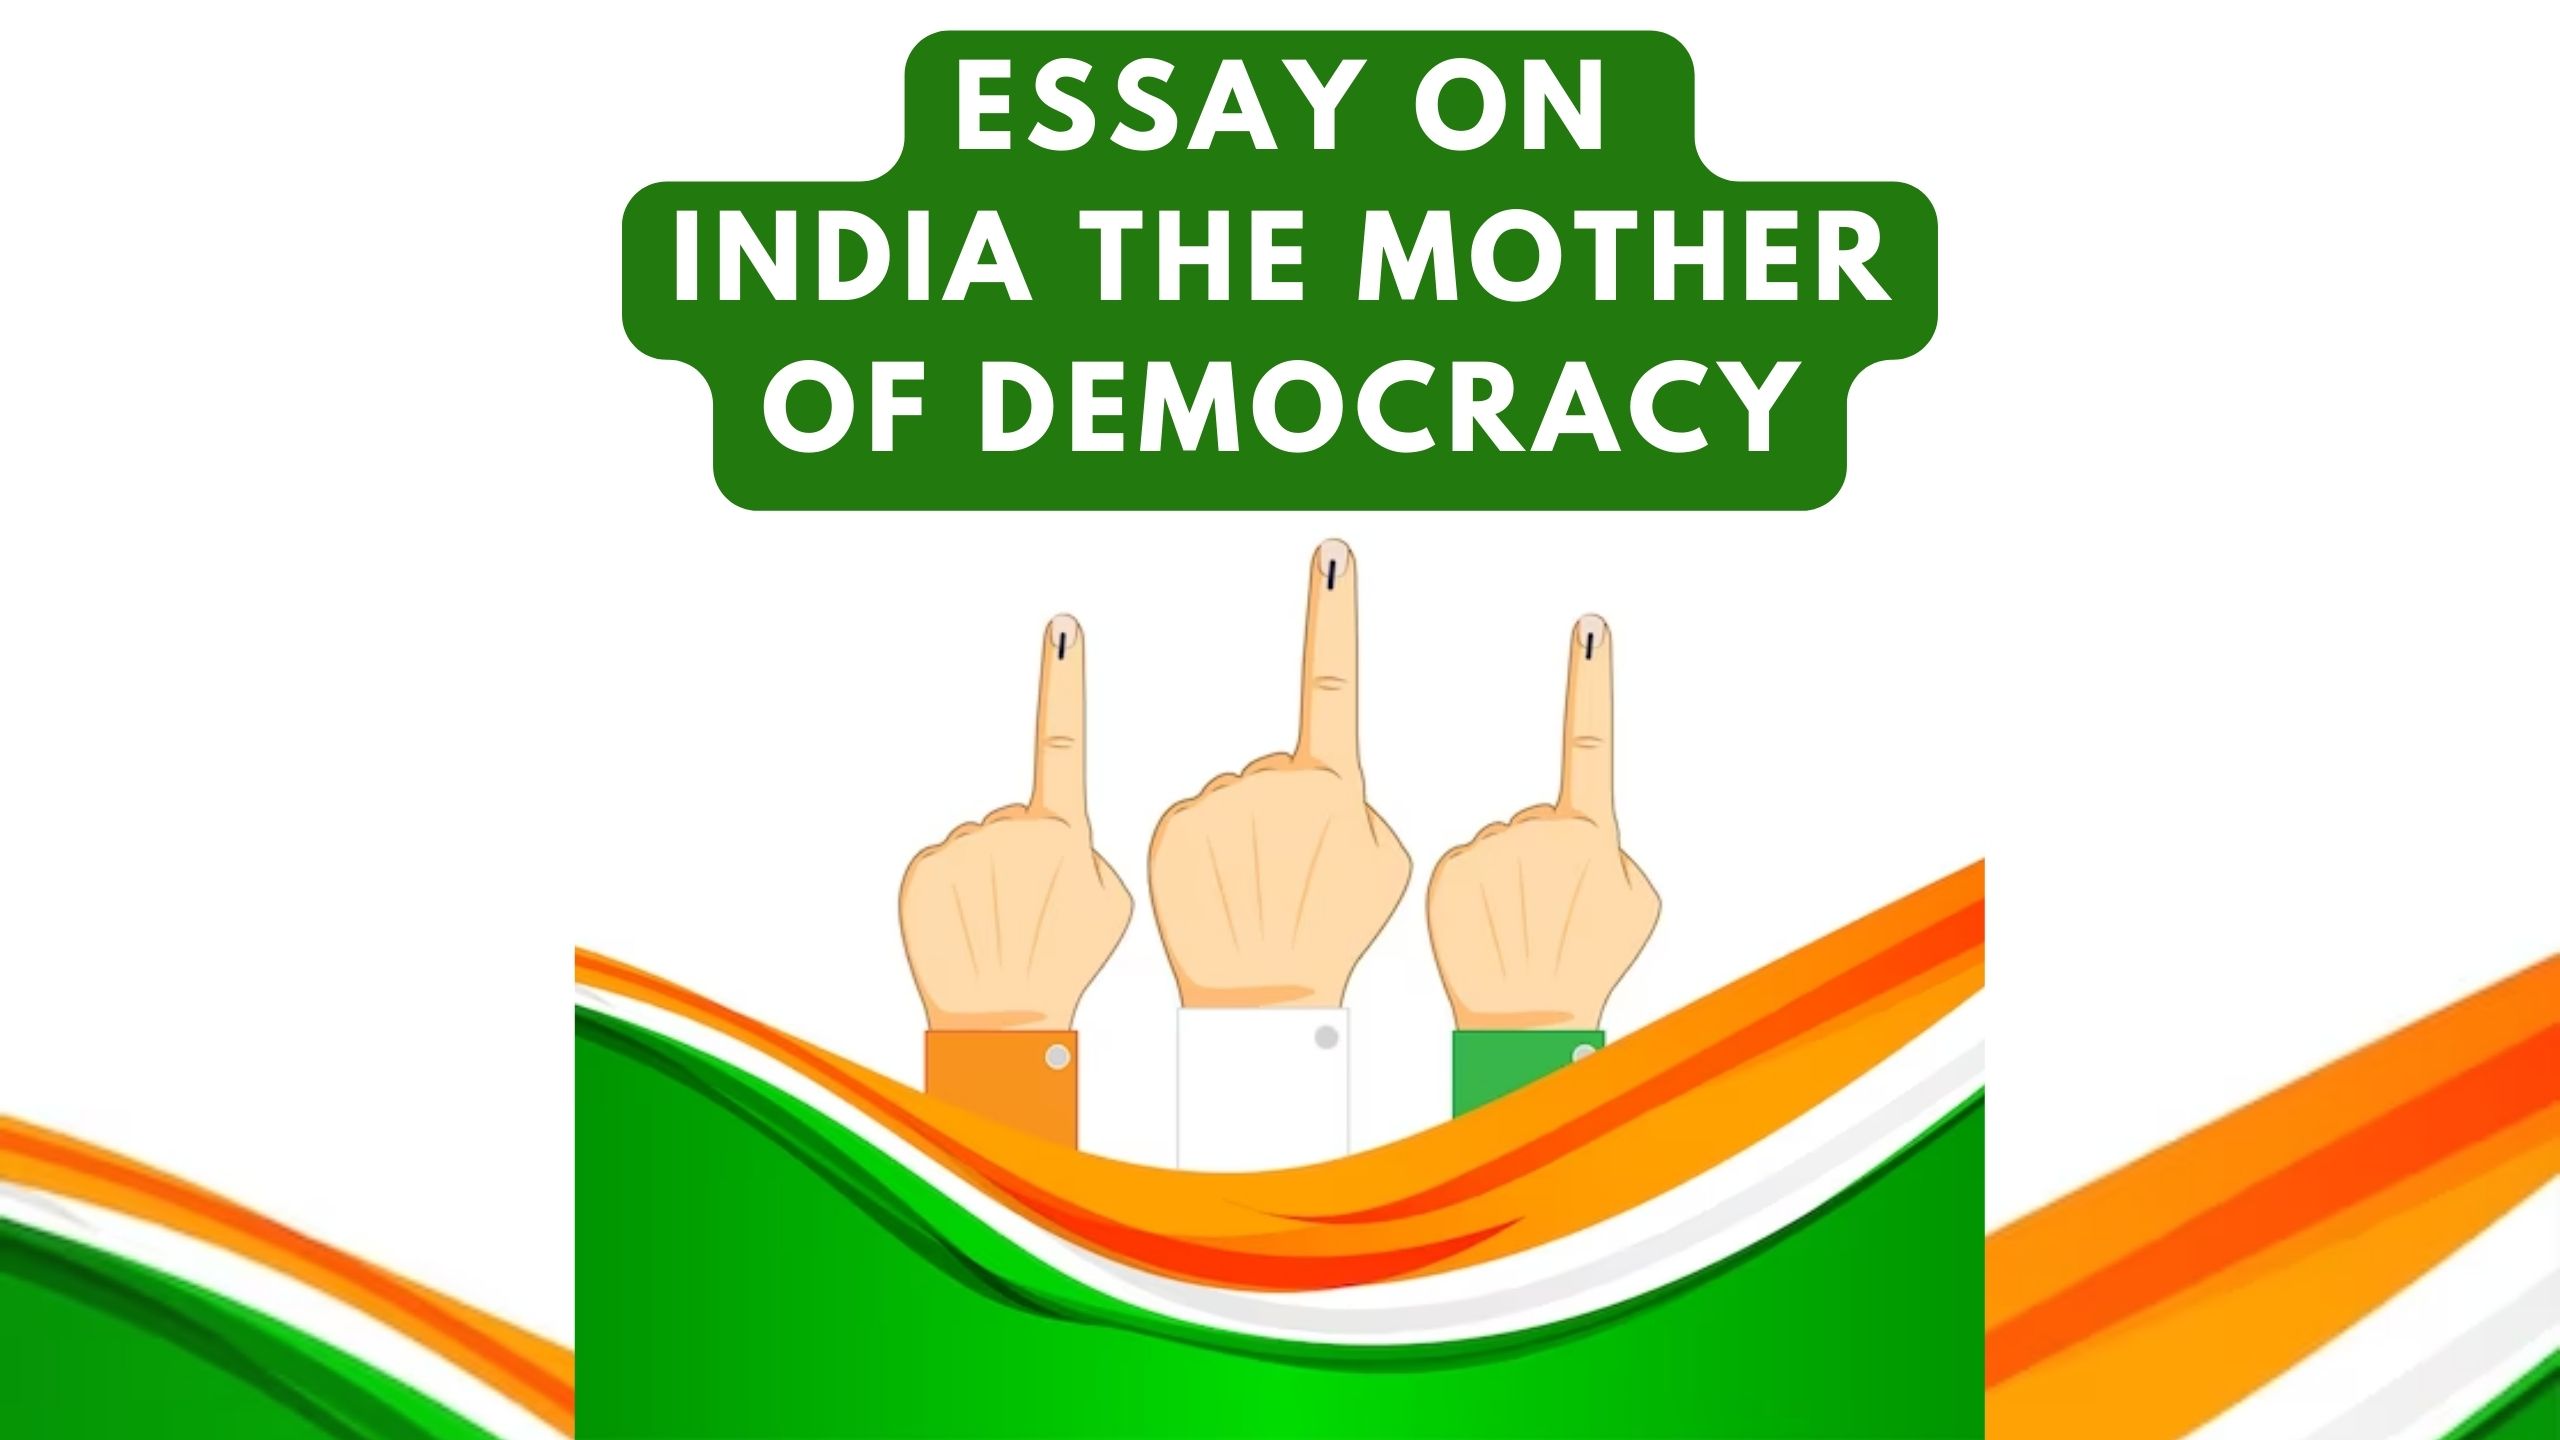 INDIA THE MOTHER OF DEMOCRACY